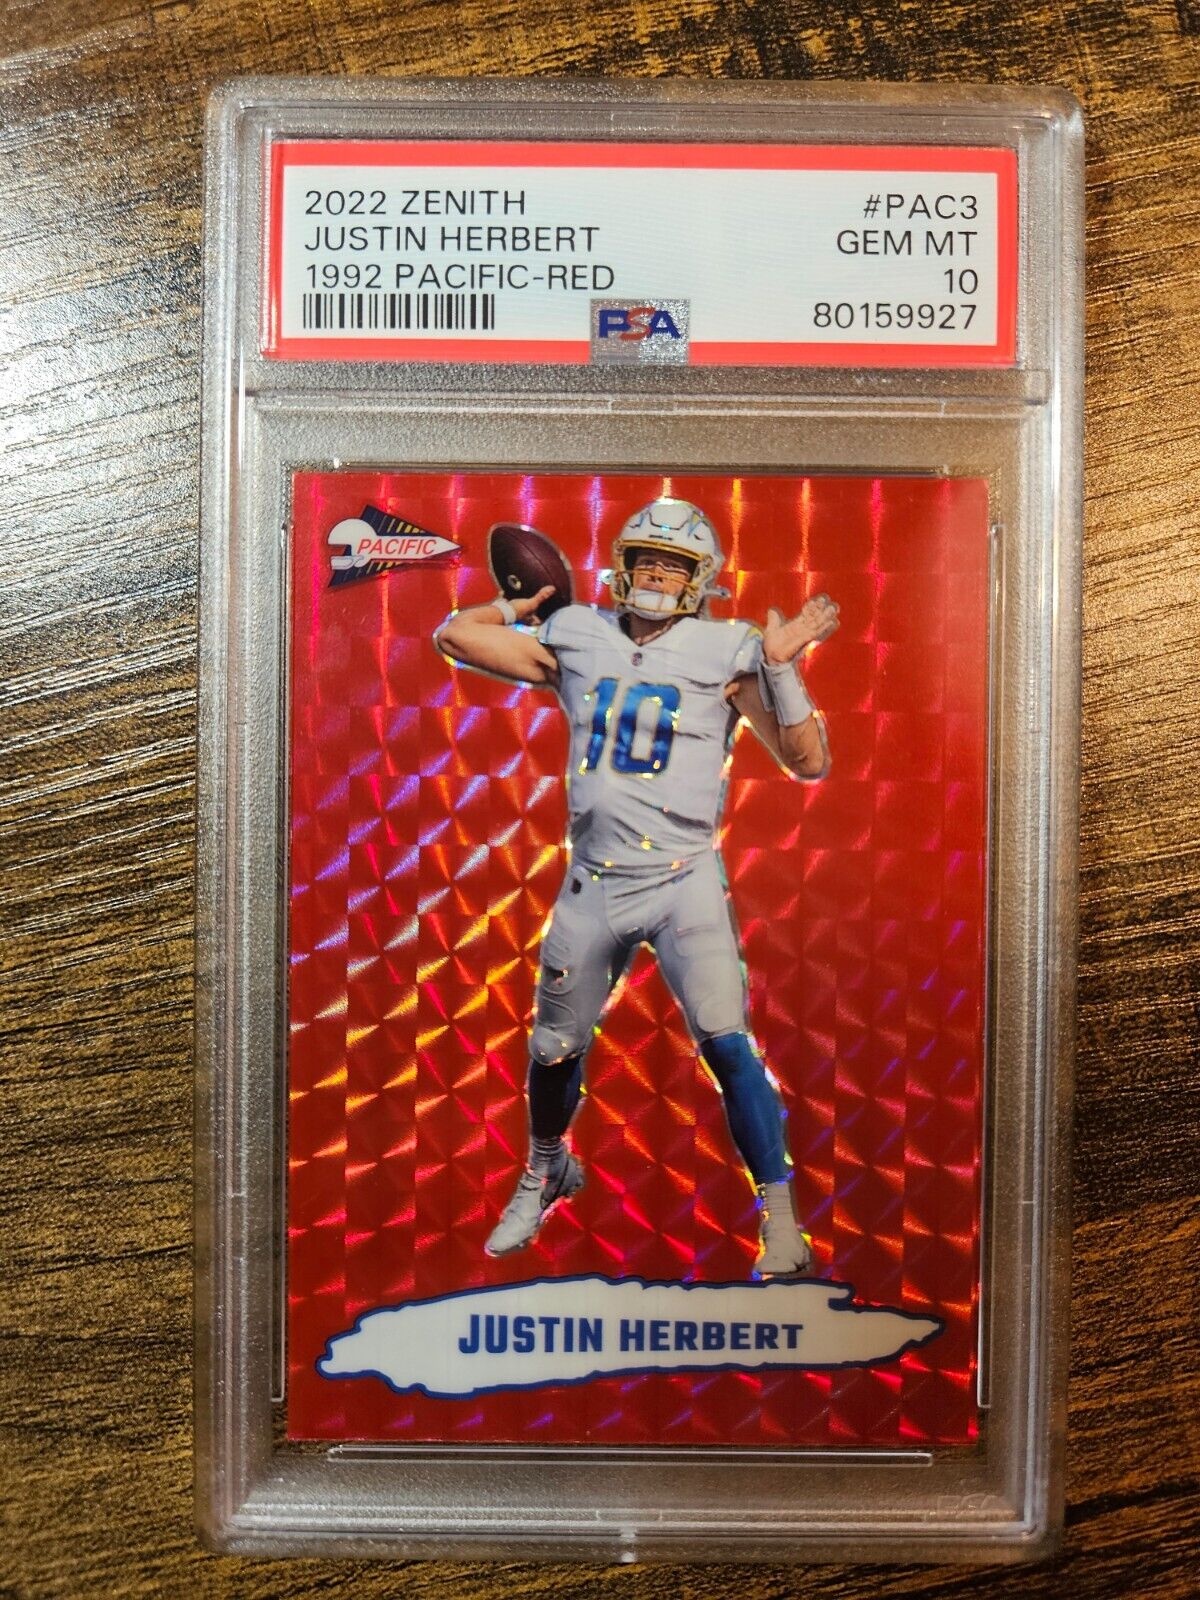 2022 Panini Zenith JUSTIN HERBERT 1992 Pacific Red #PAC-3 - Chargers PSA 10 GEM